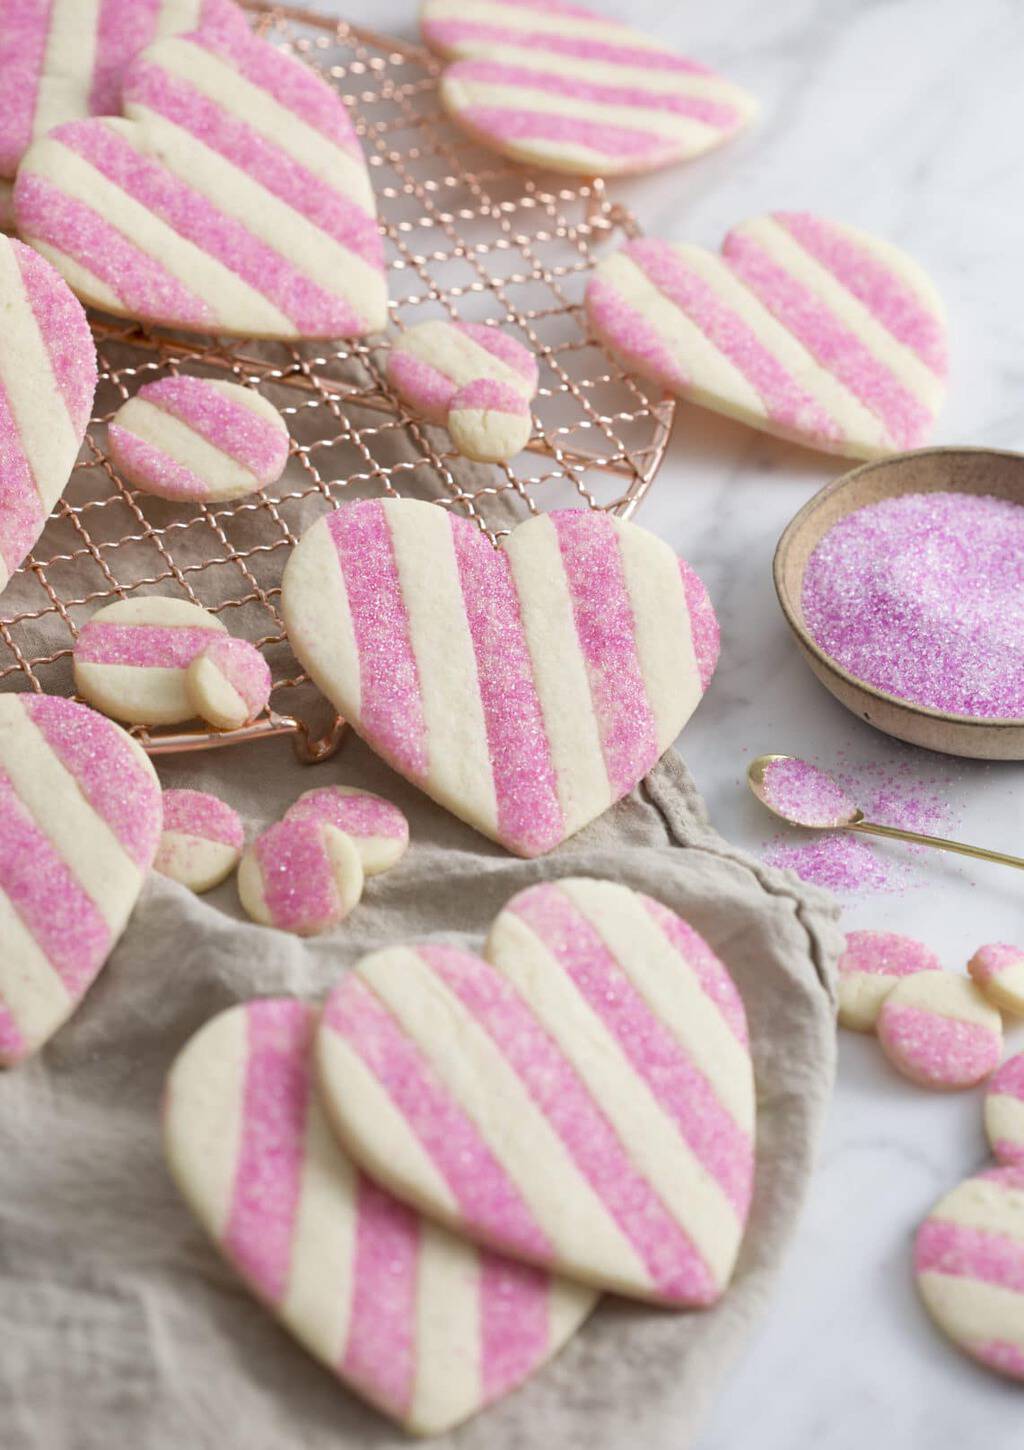 A photo showing a group of striped pink and white Valentine's Day Heart Cookies on a white marble surface